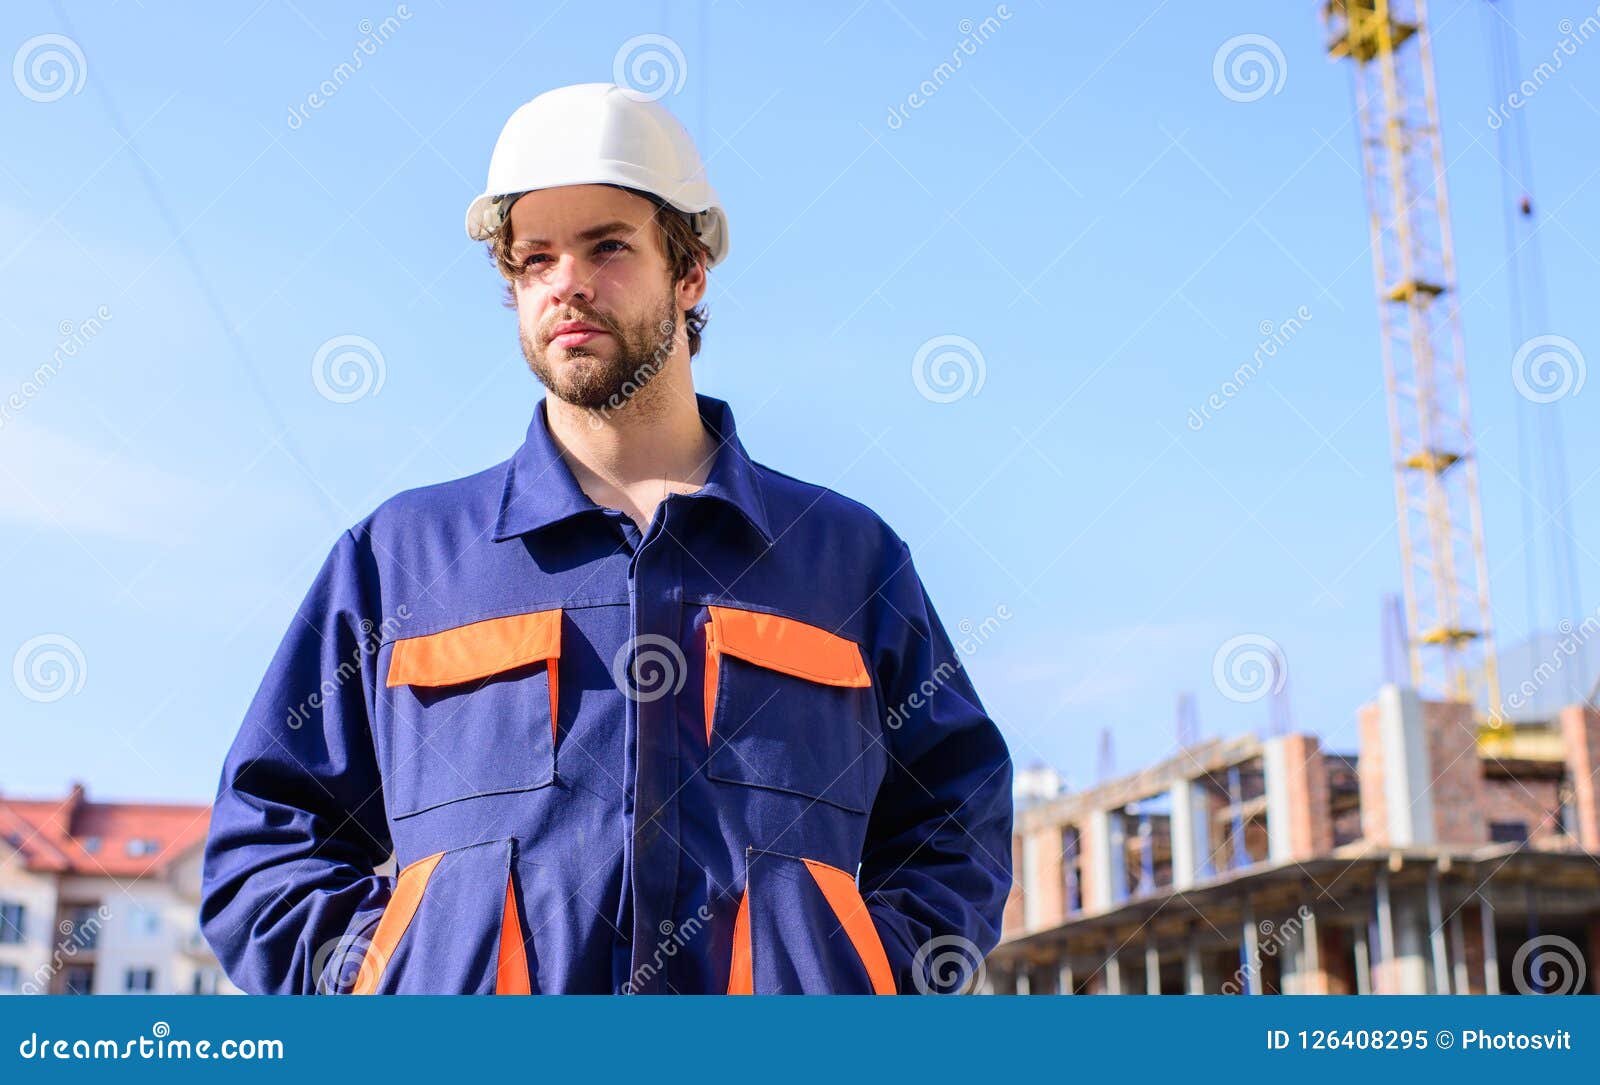 Control Construction Process. Builder in Working Clothes and Helmet